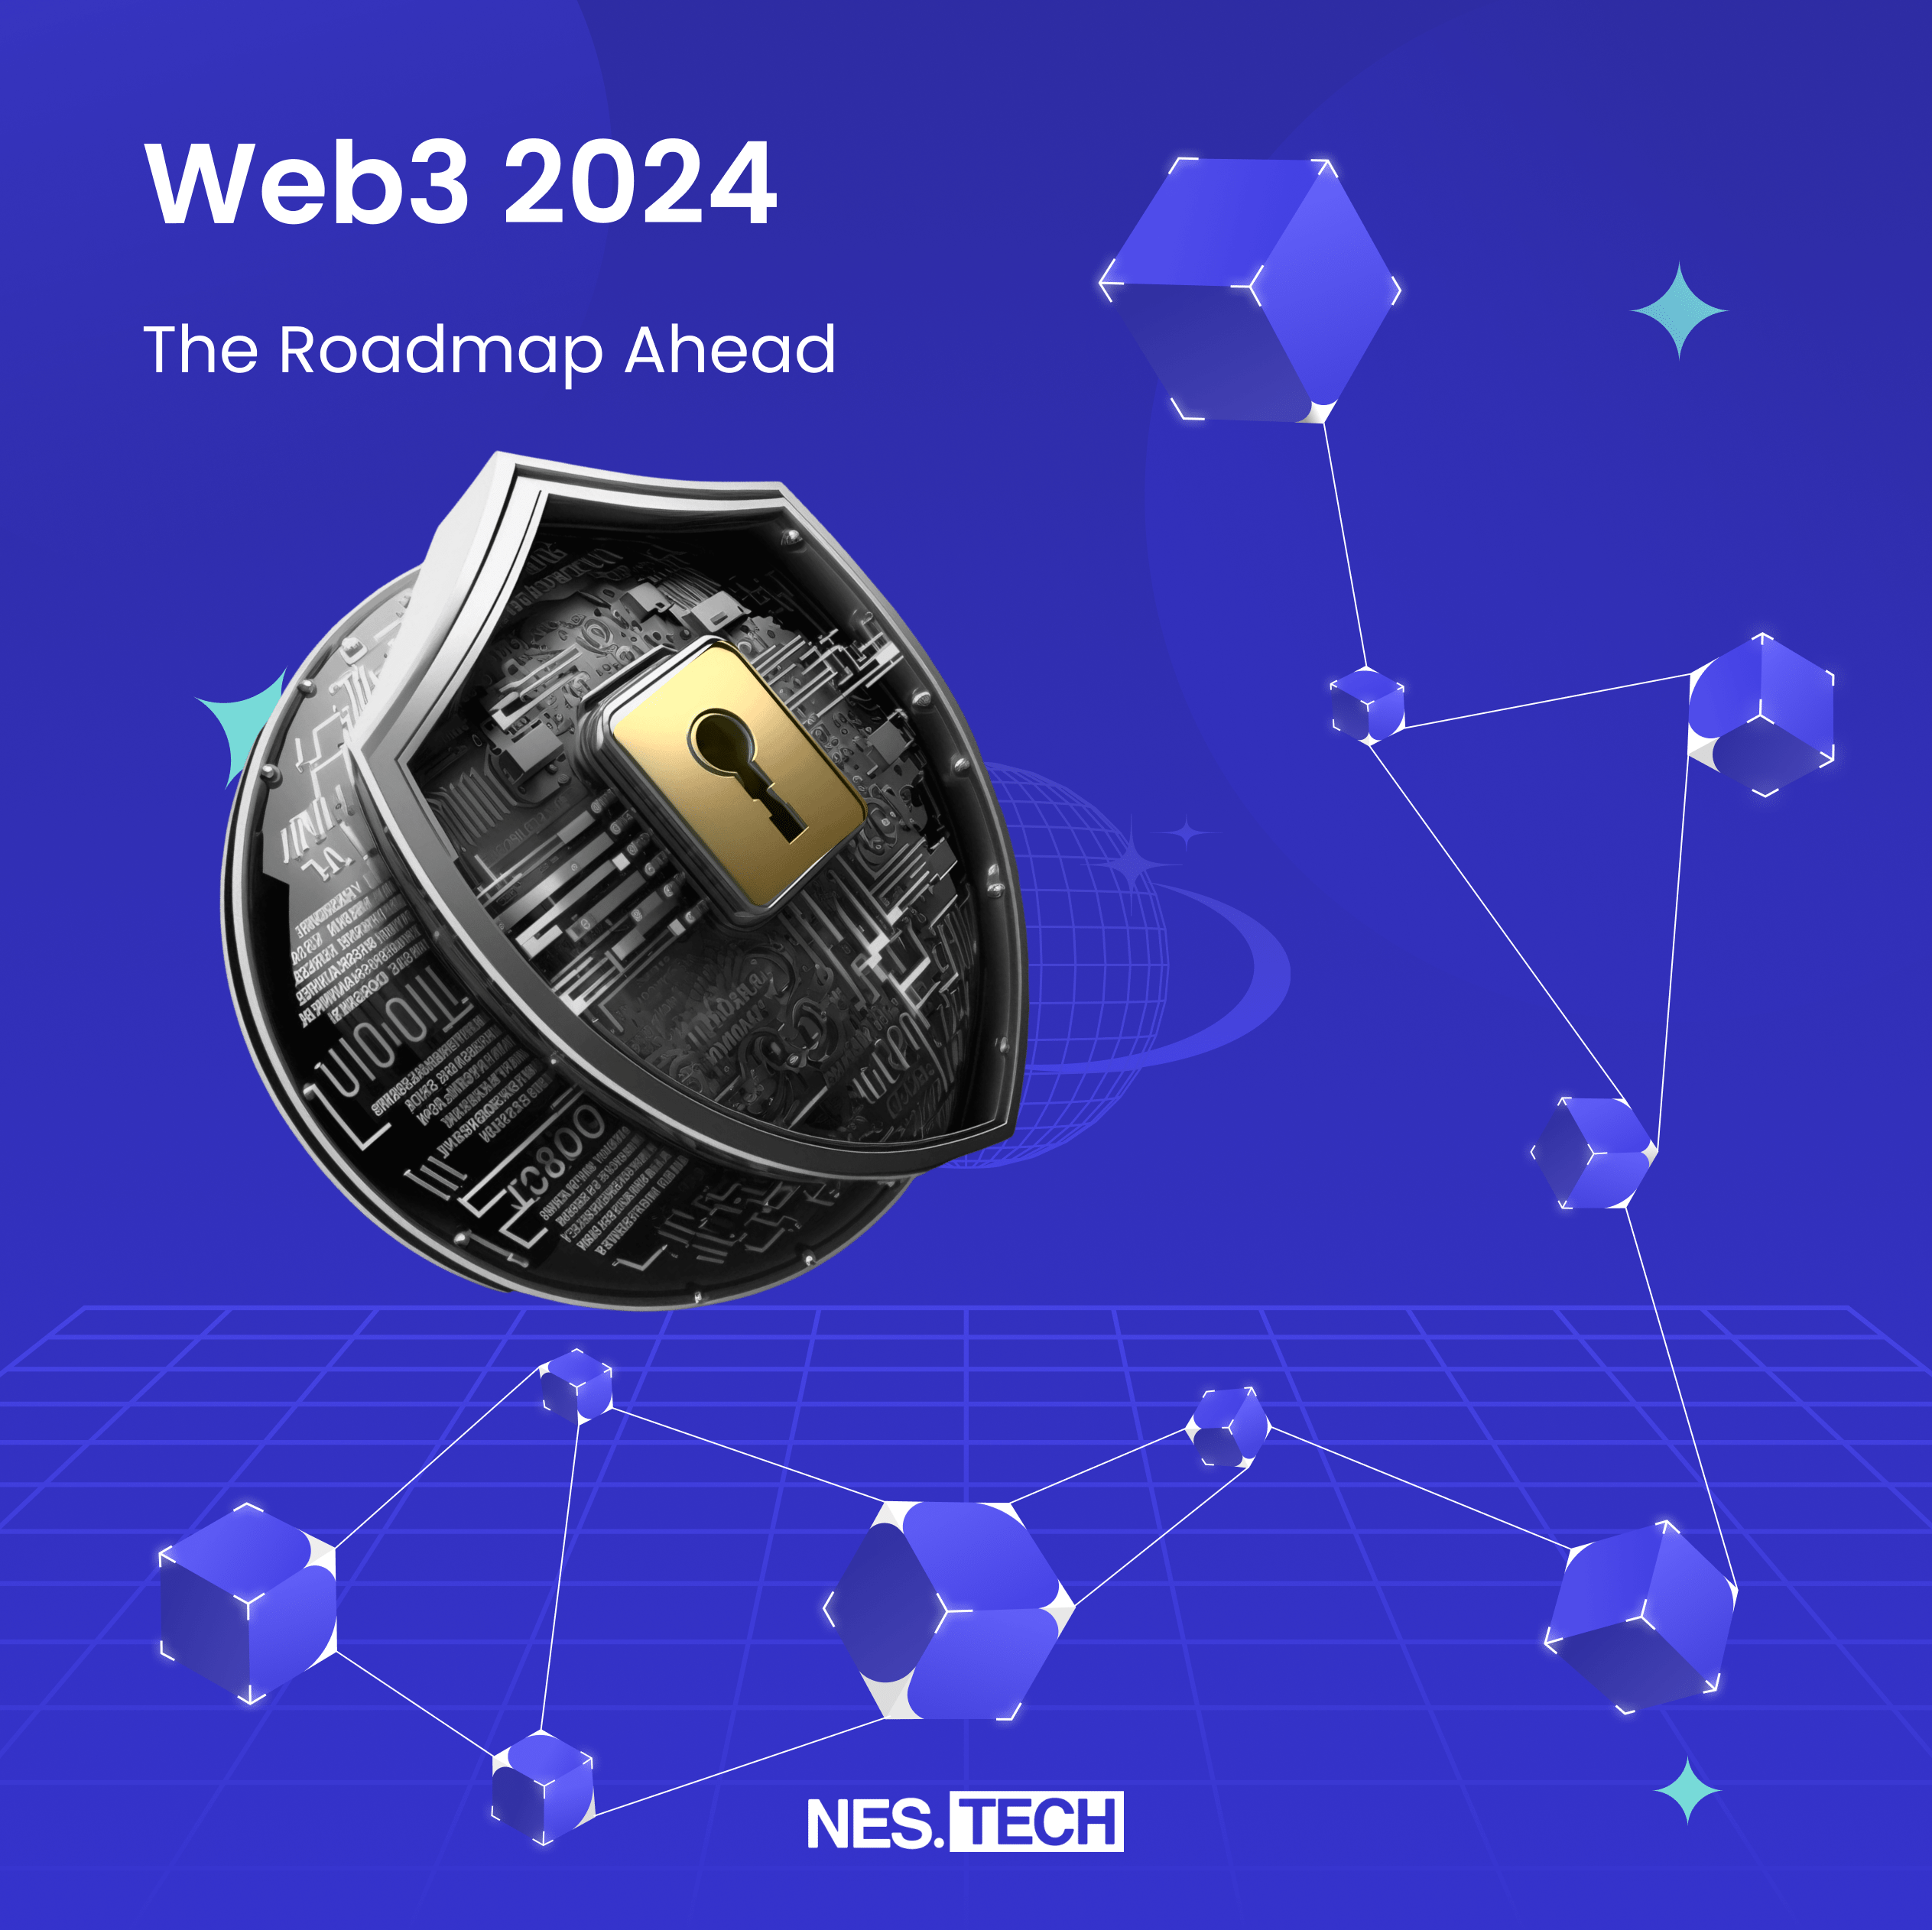 Top 5 Most Important Web3 Predictions For 2024